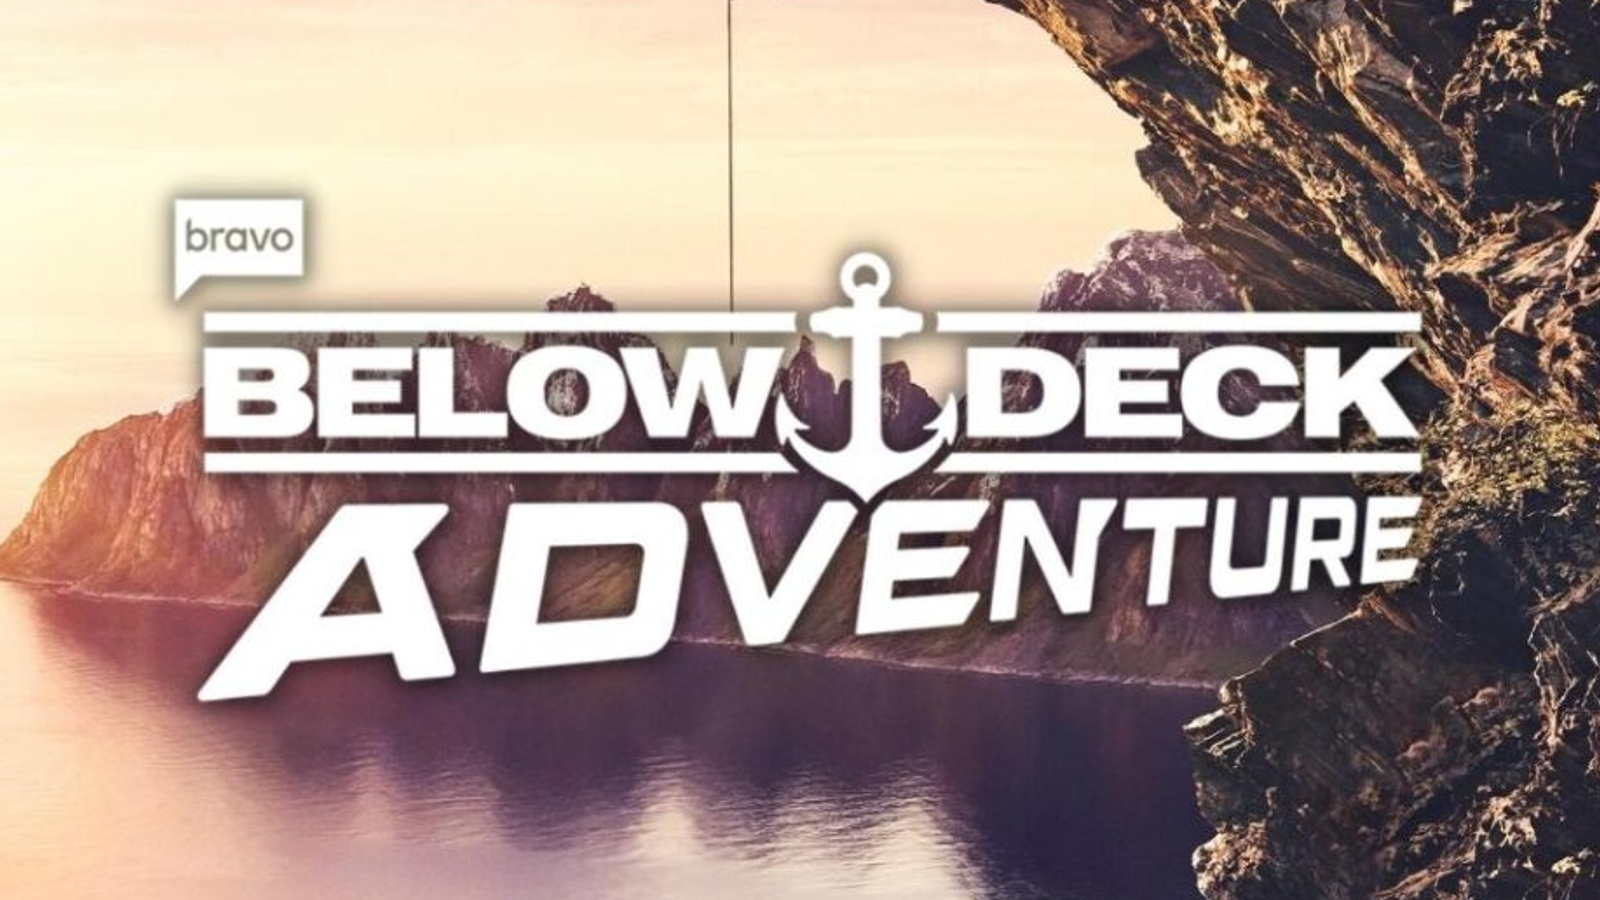 Will there be a Season 2 of Below Deck Adventures?